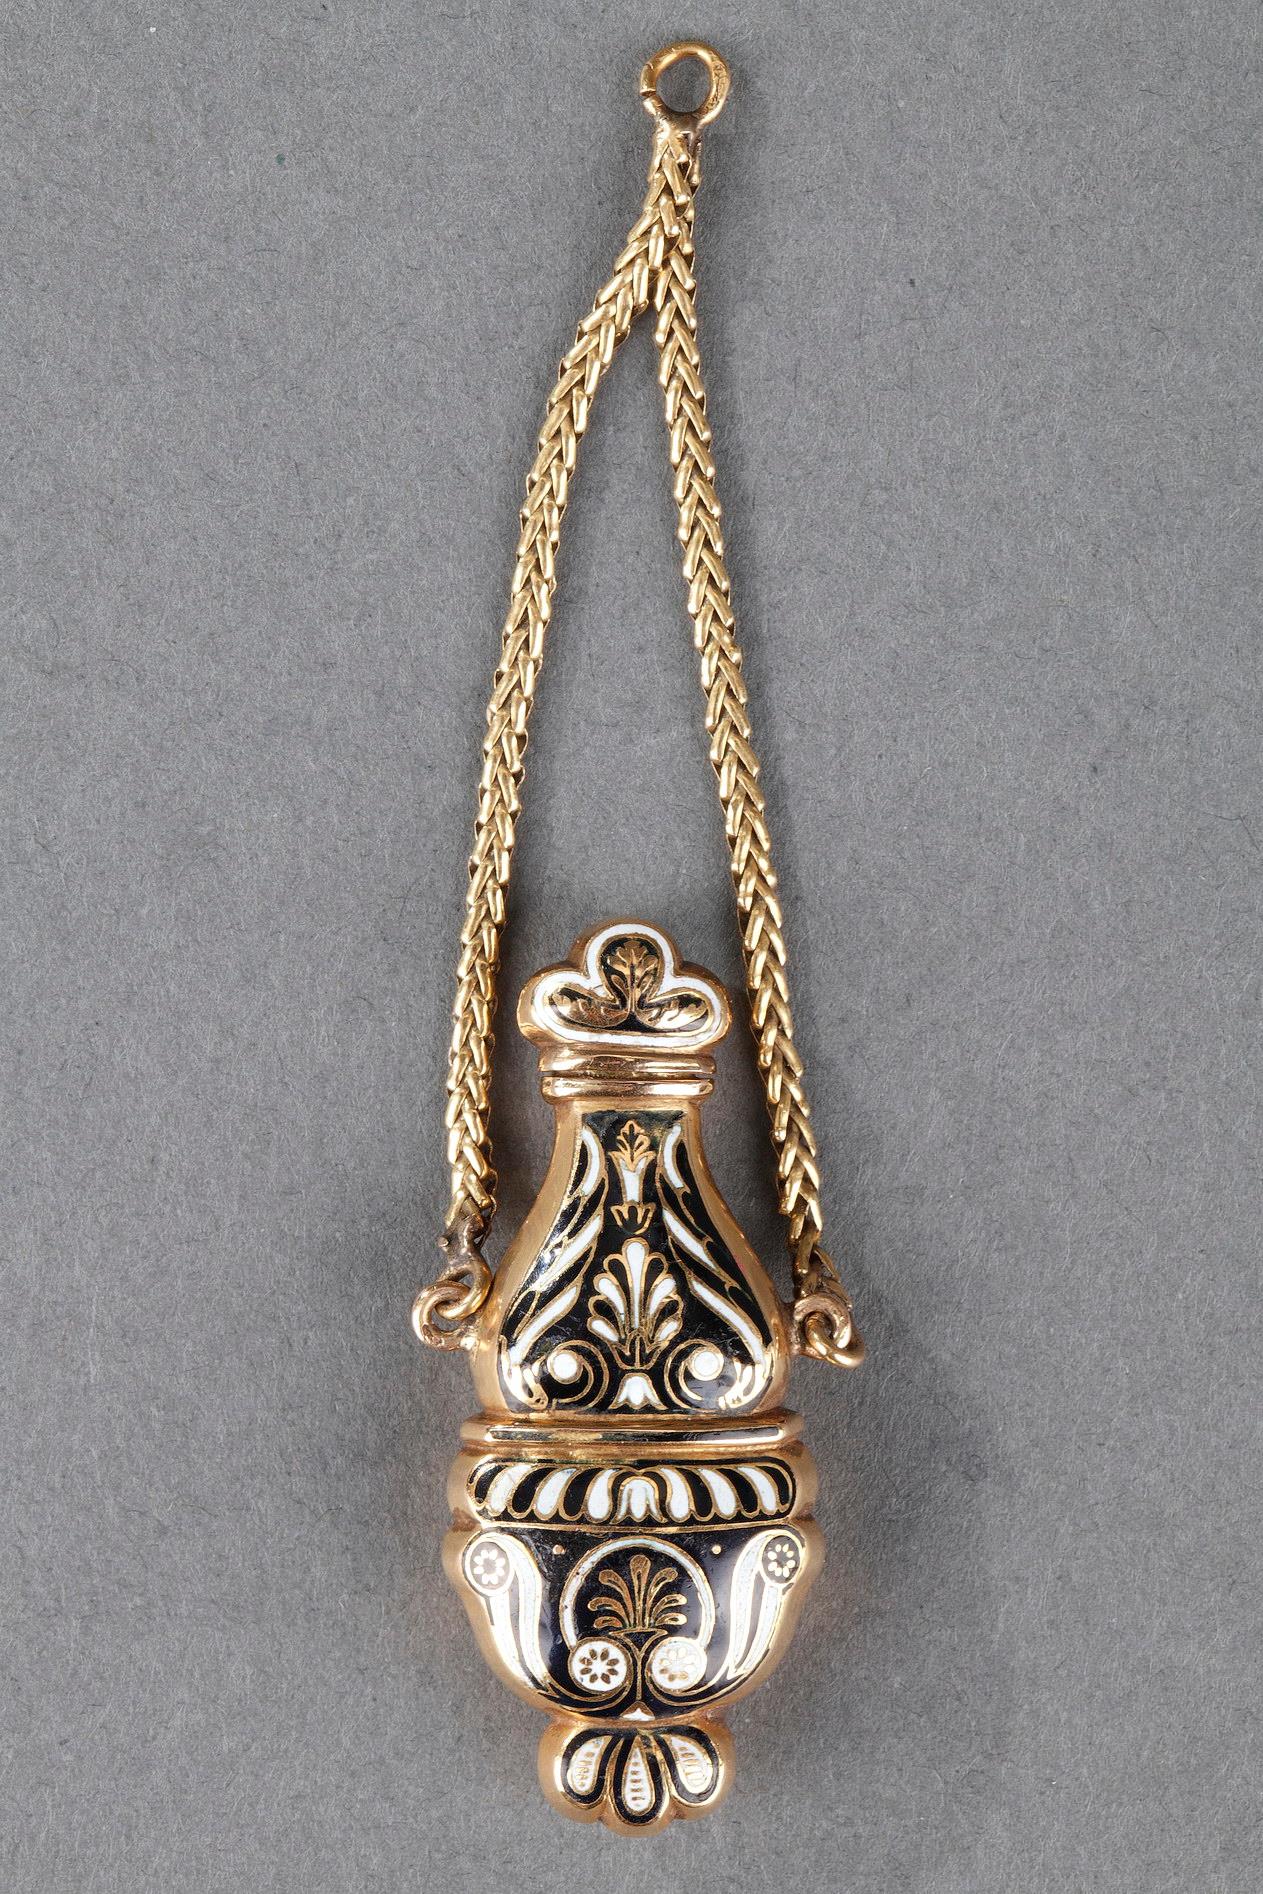 Gold and enamel flask. 
Restauration period. Circa 1830-1840.